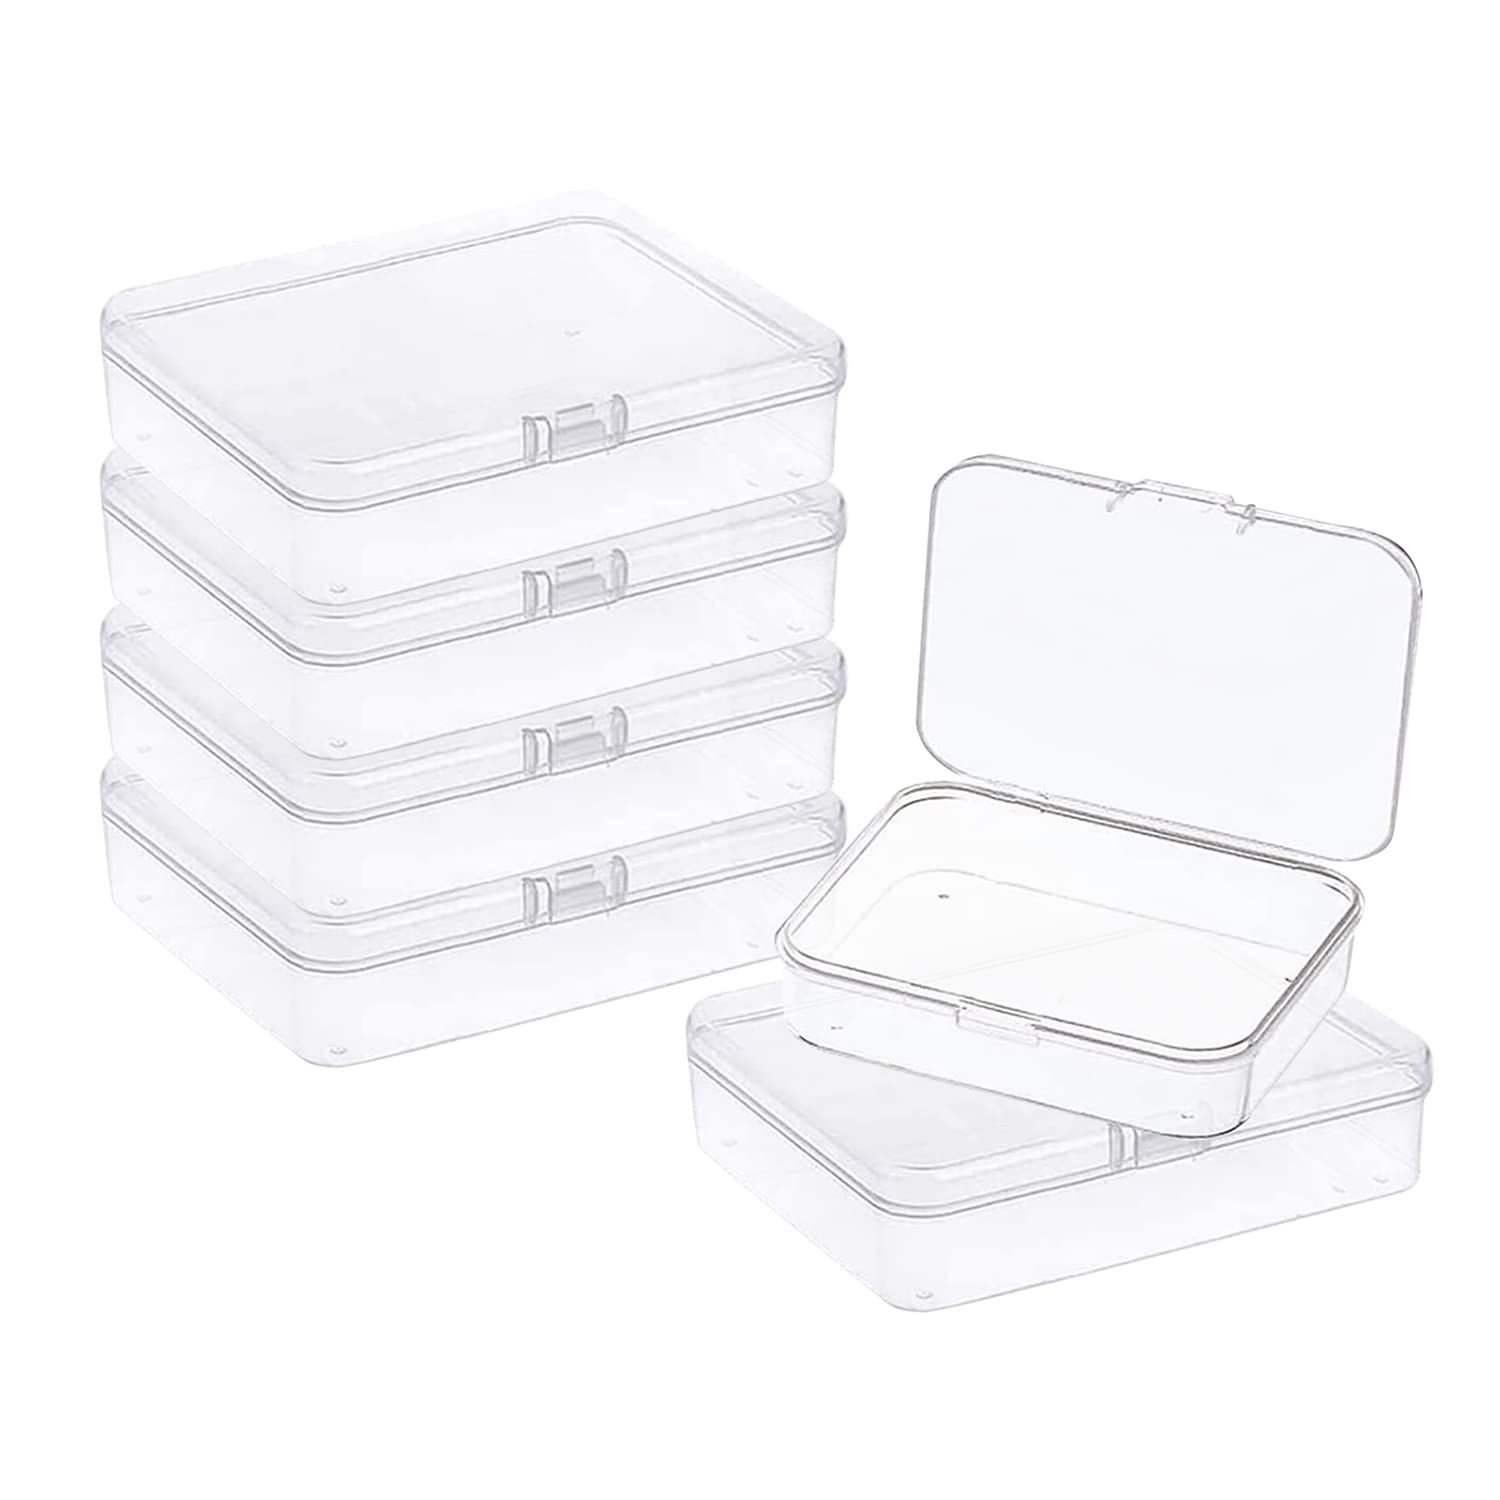 MFDSJ 6 Pcs Mini Plastic Storage Containers Box with Lid 4.5x3.4 Inches  Clear Rectangle